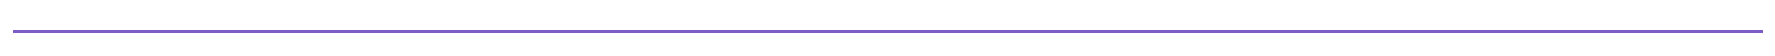 Example of a divider paragraph icon, which, here, is a purple line